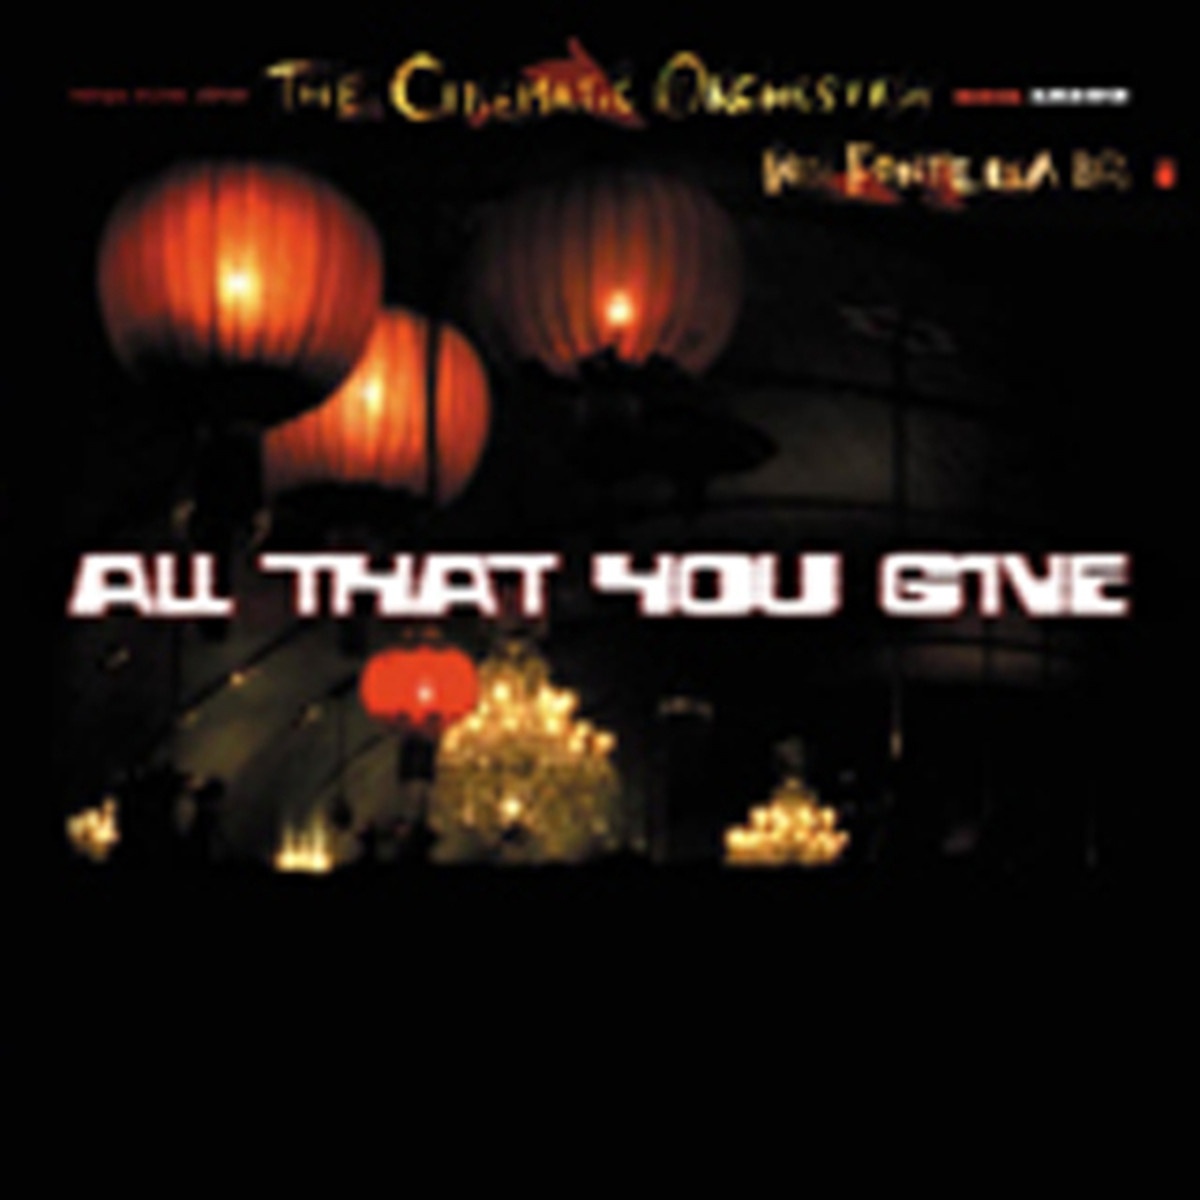 All That You Give (radio edit)